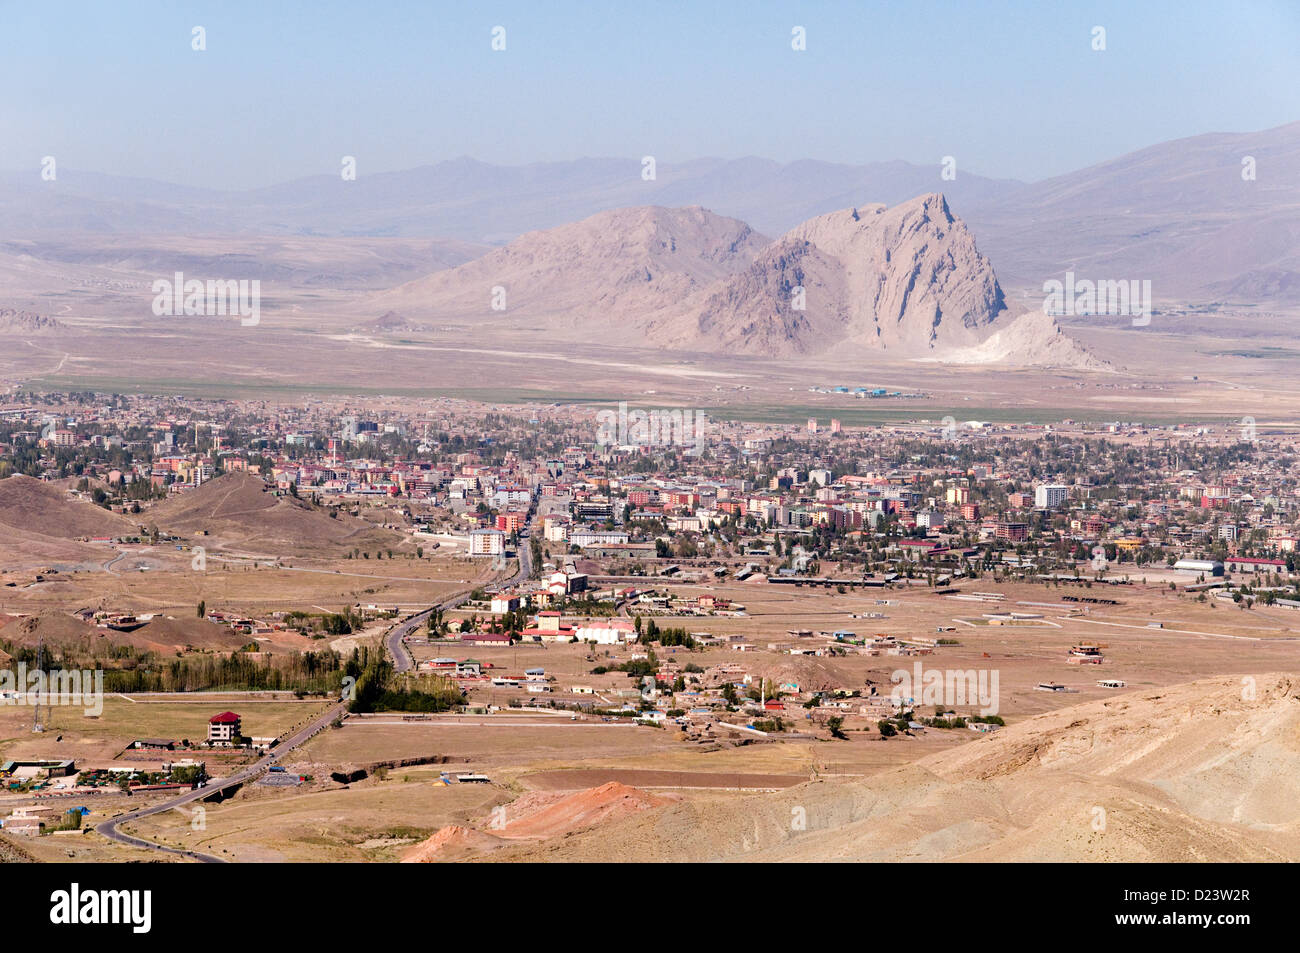 A view of the Kurdish city of Dogubeyazit, in the eastern Anatolia region of Turkey, near the borders with Armenia and Iran. Stock Photo